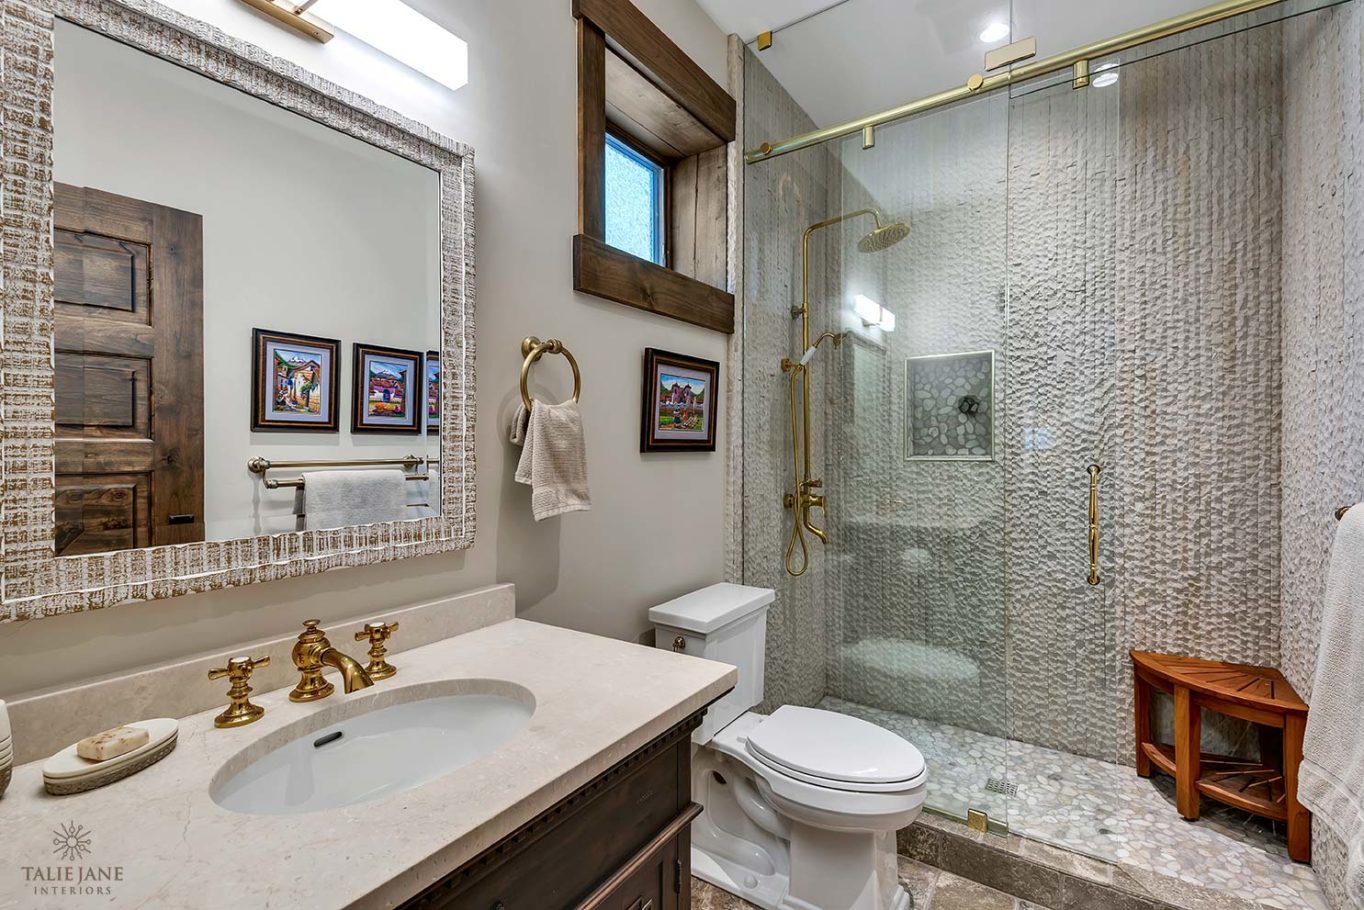 White stone and concrete bathroom with golden bathroom fittings